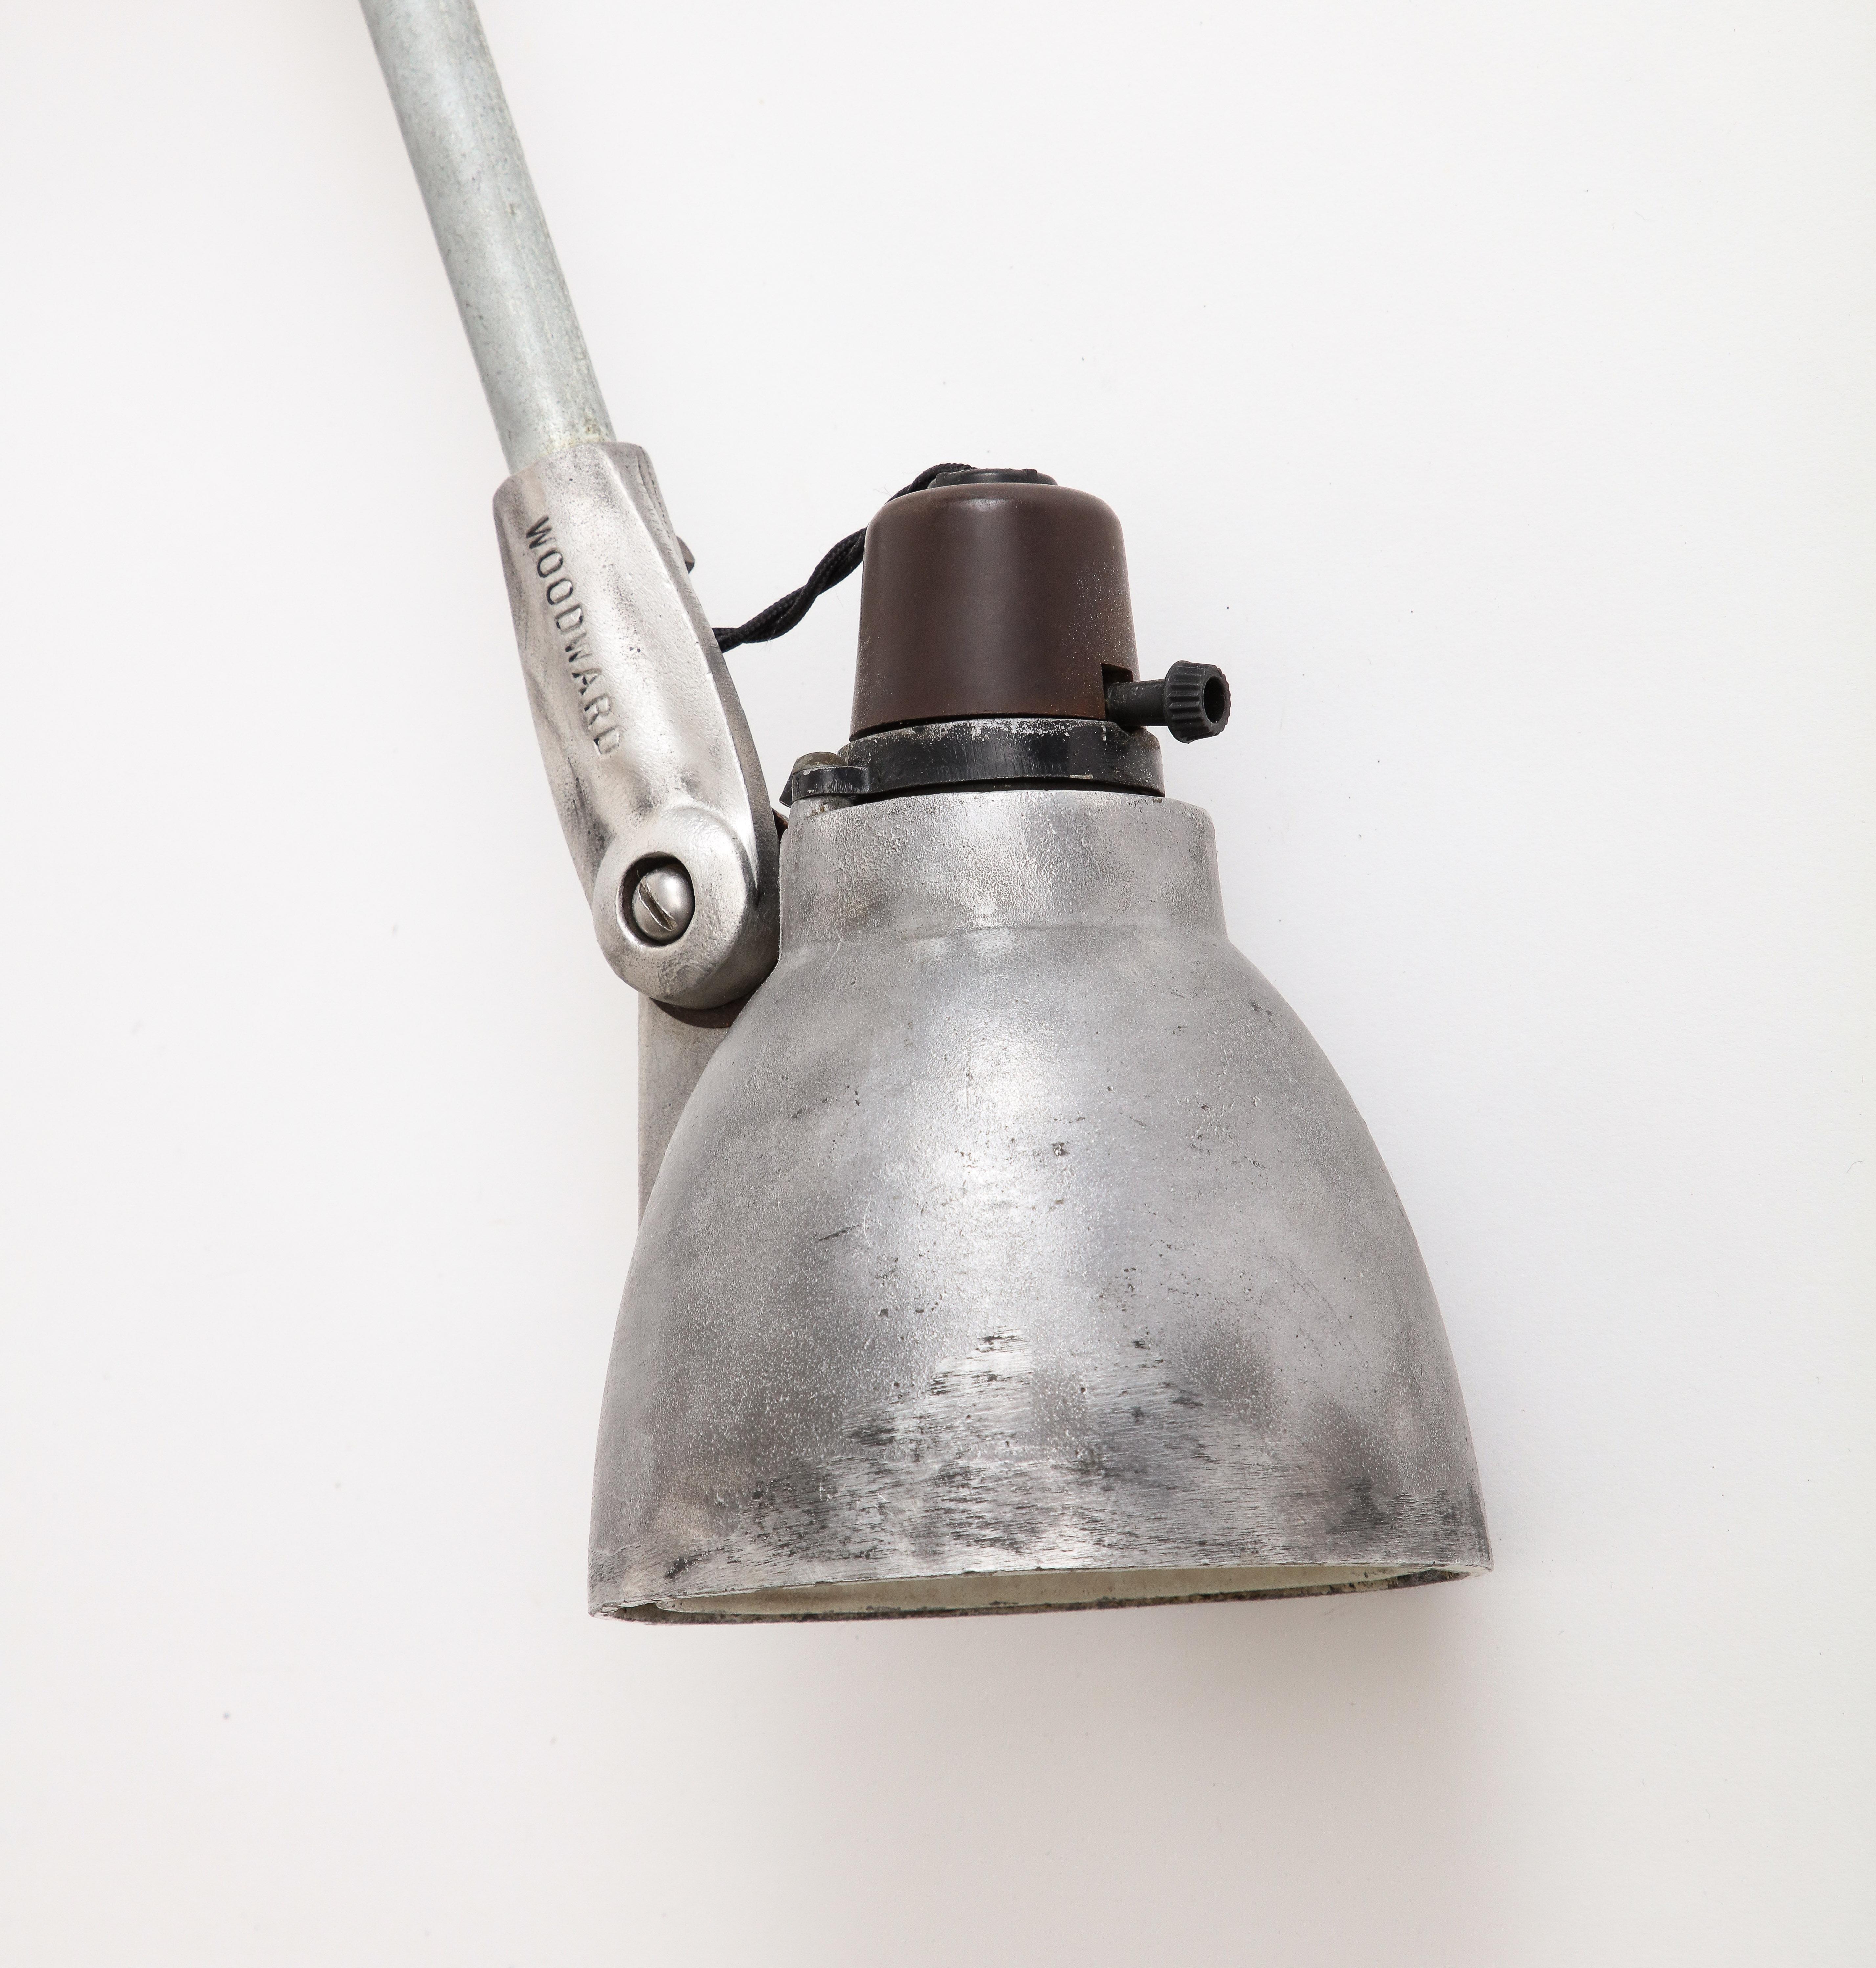 Industrial Anglepoise Wall Mounted Cast Iron Sconce, c. 1940 For Sale 2